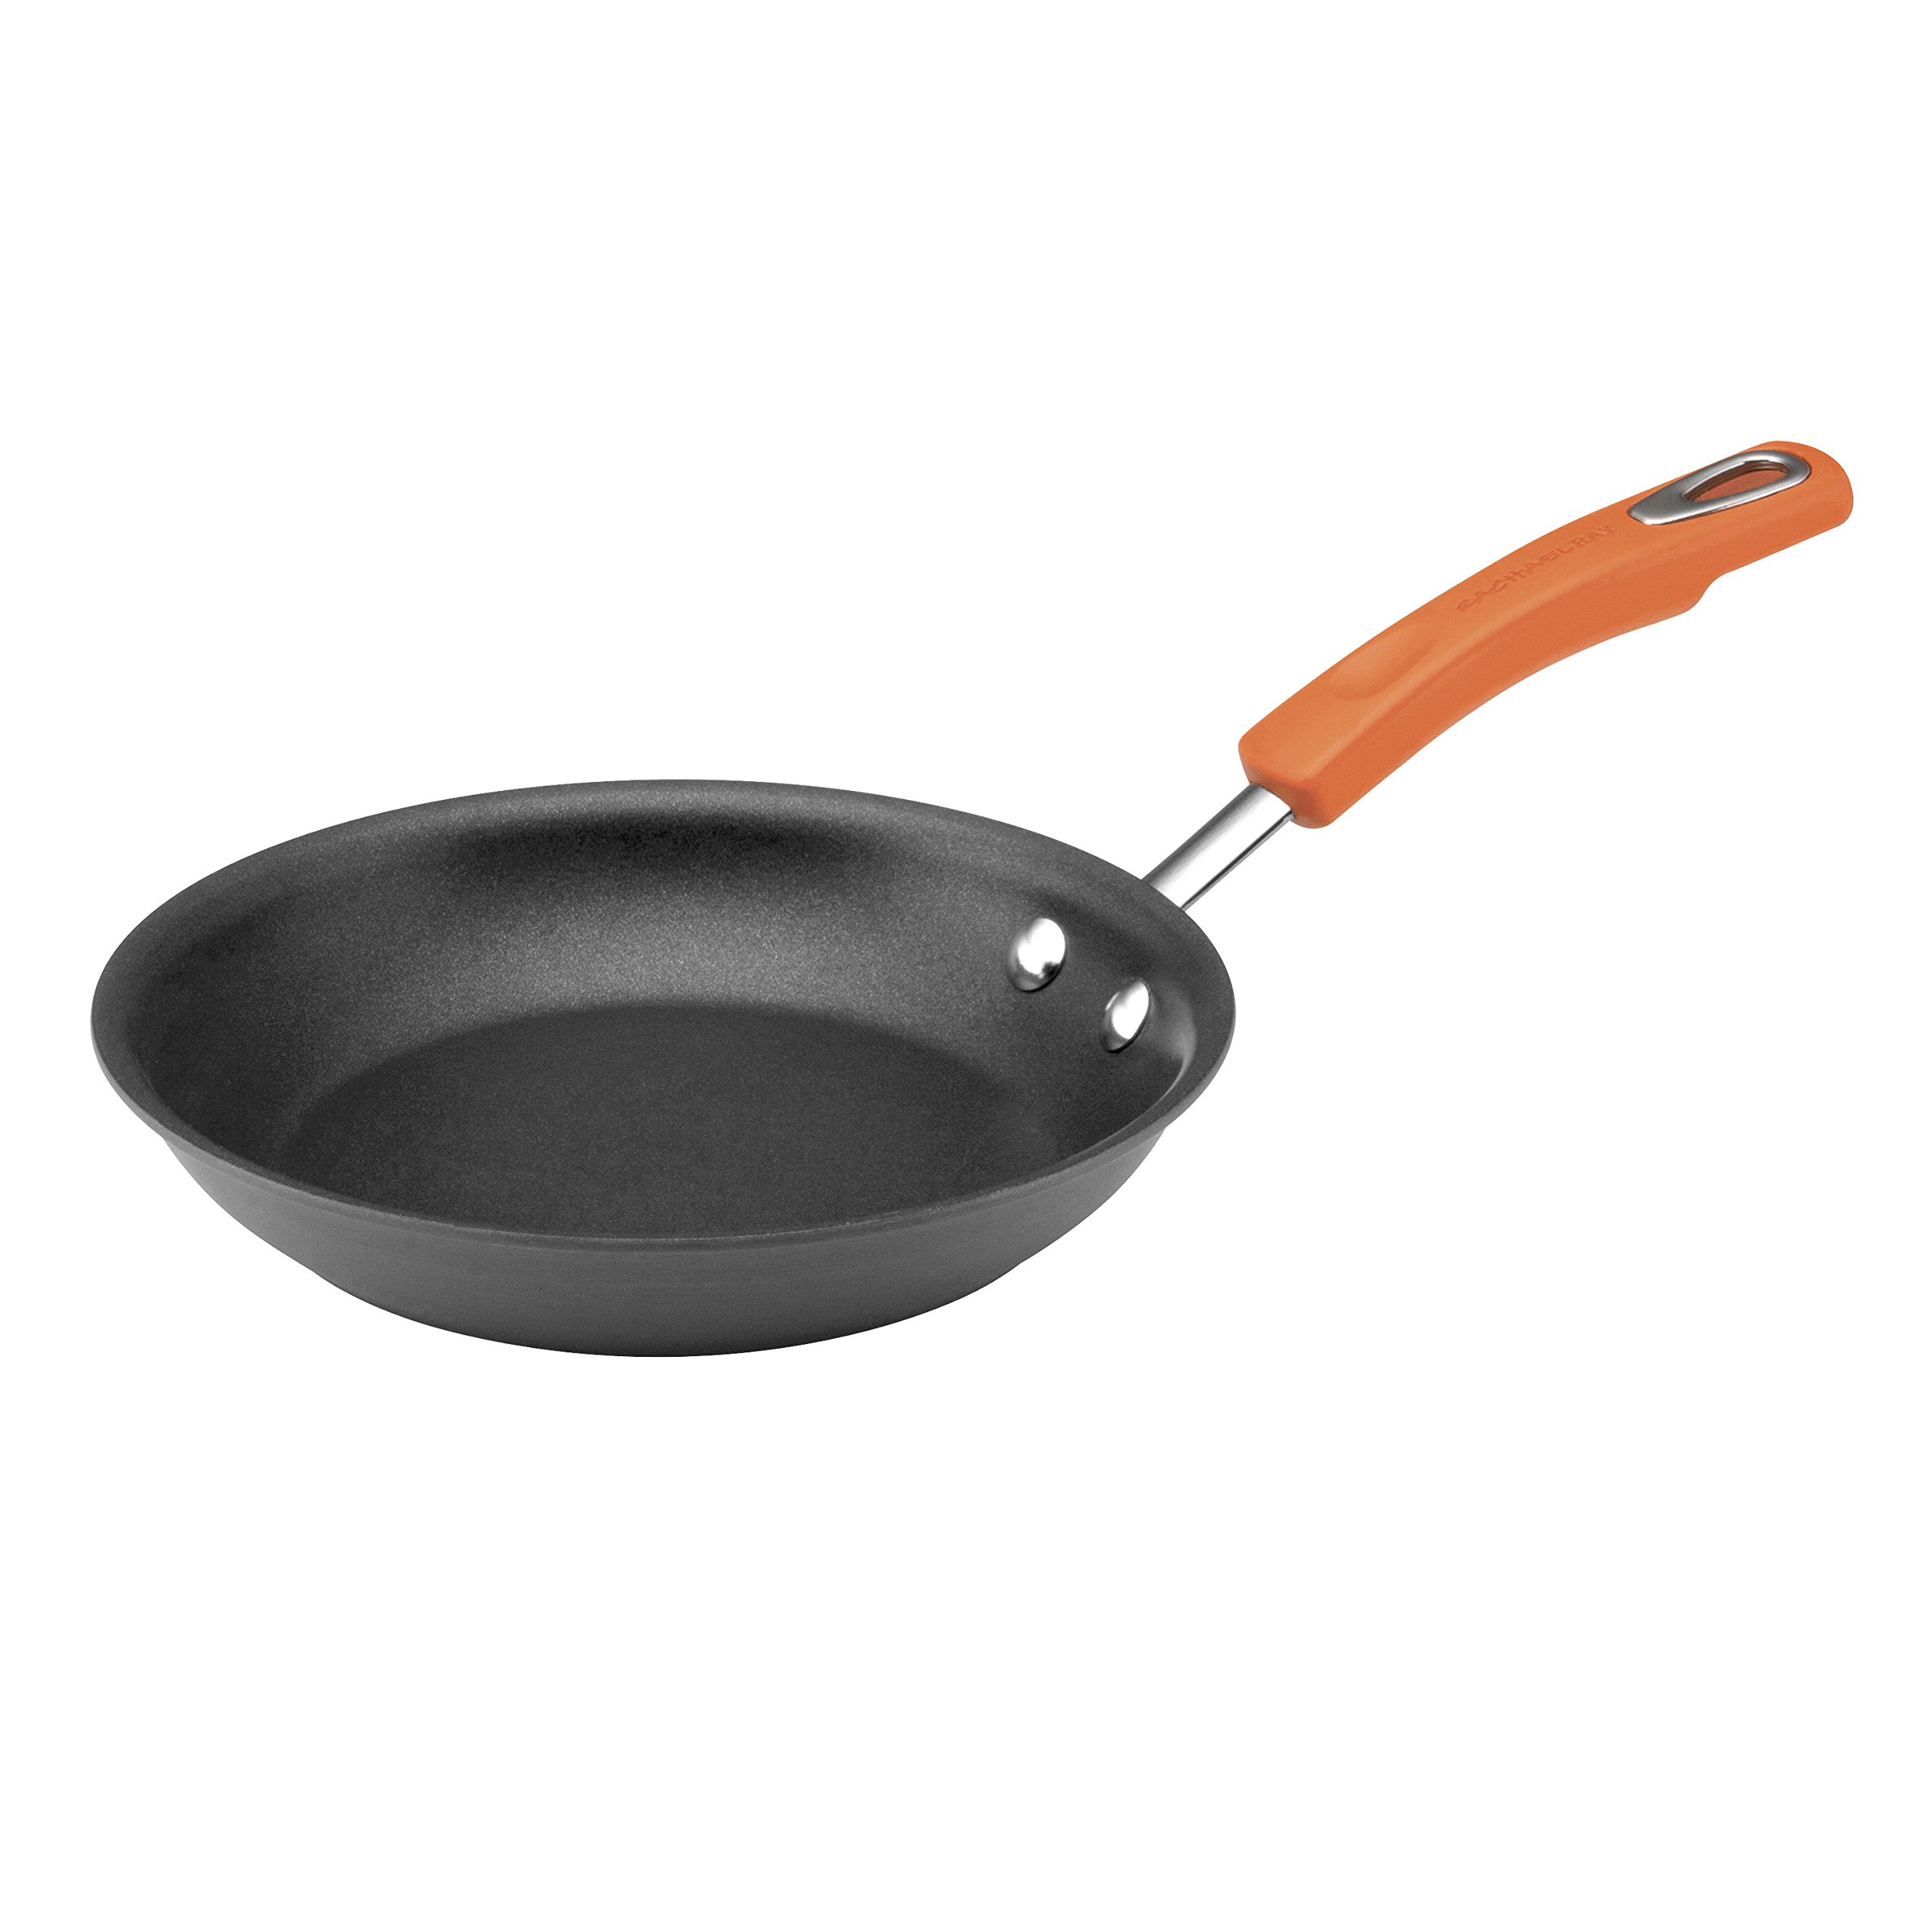 8.5" Rachael Ray Hard-Anodized Nonstick Skillet (Gray/Orange) $10 + Free Shipping w/ Prime or on orders $35+